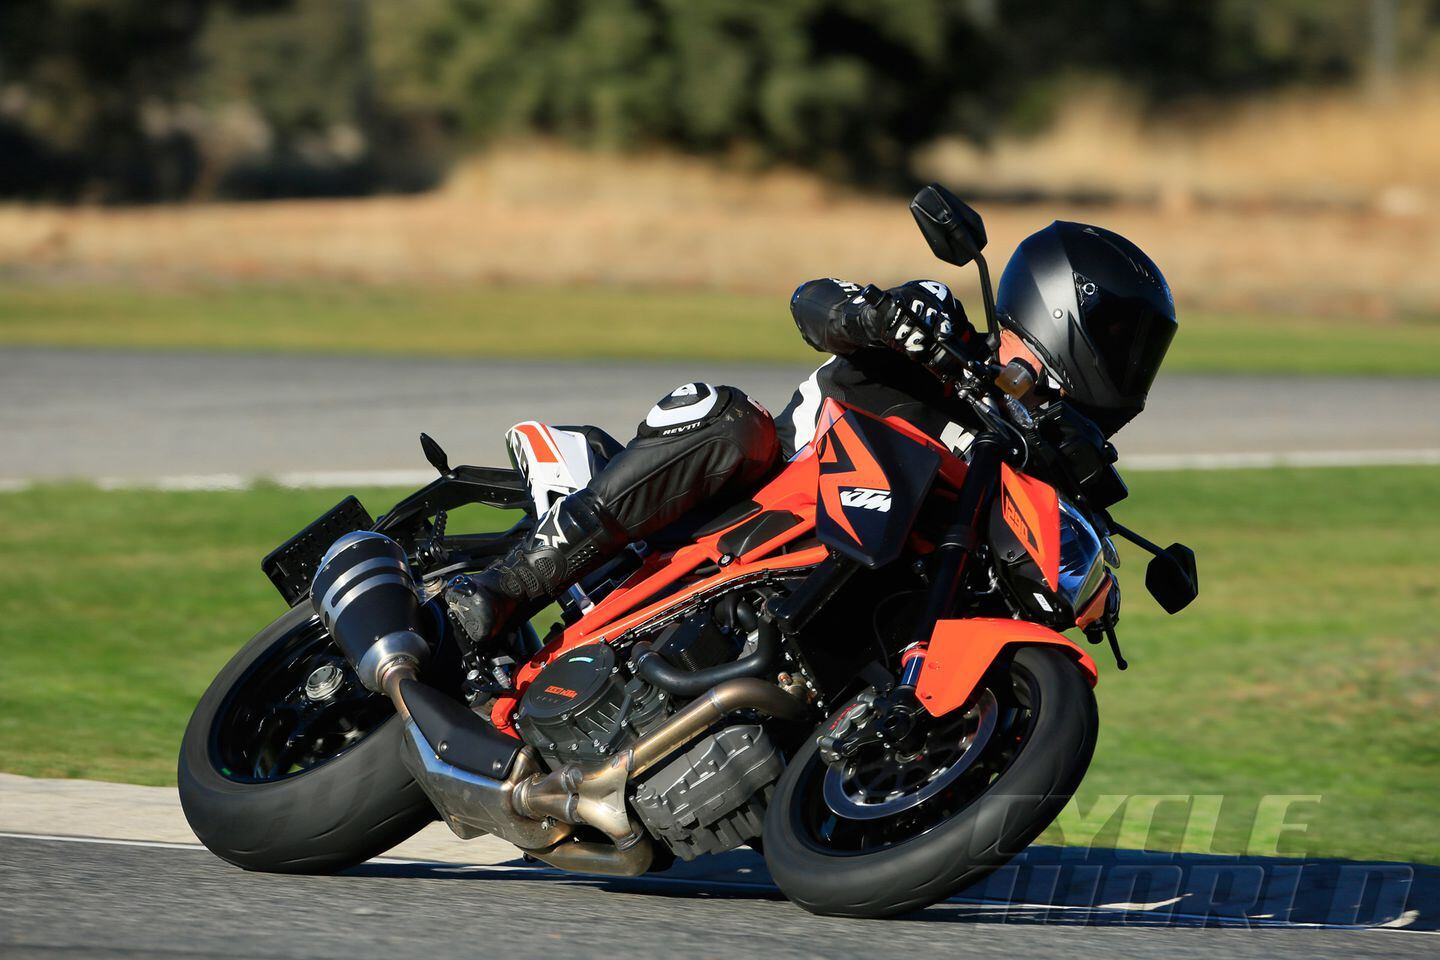 2014 KTM 1290 Super Duke R First Ride Review- Photos | Cycle World